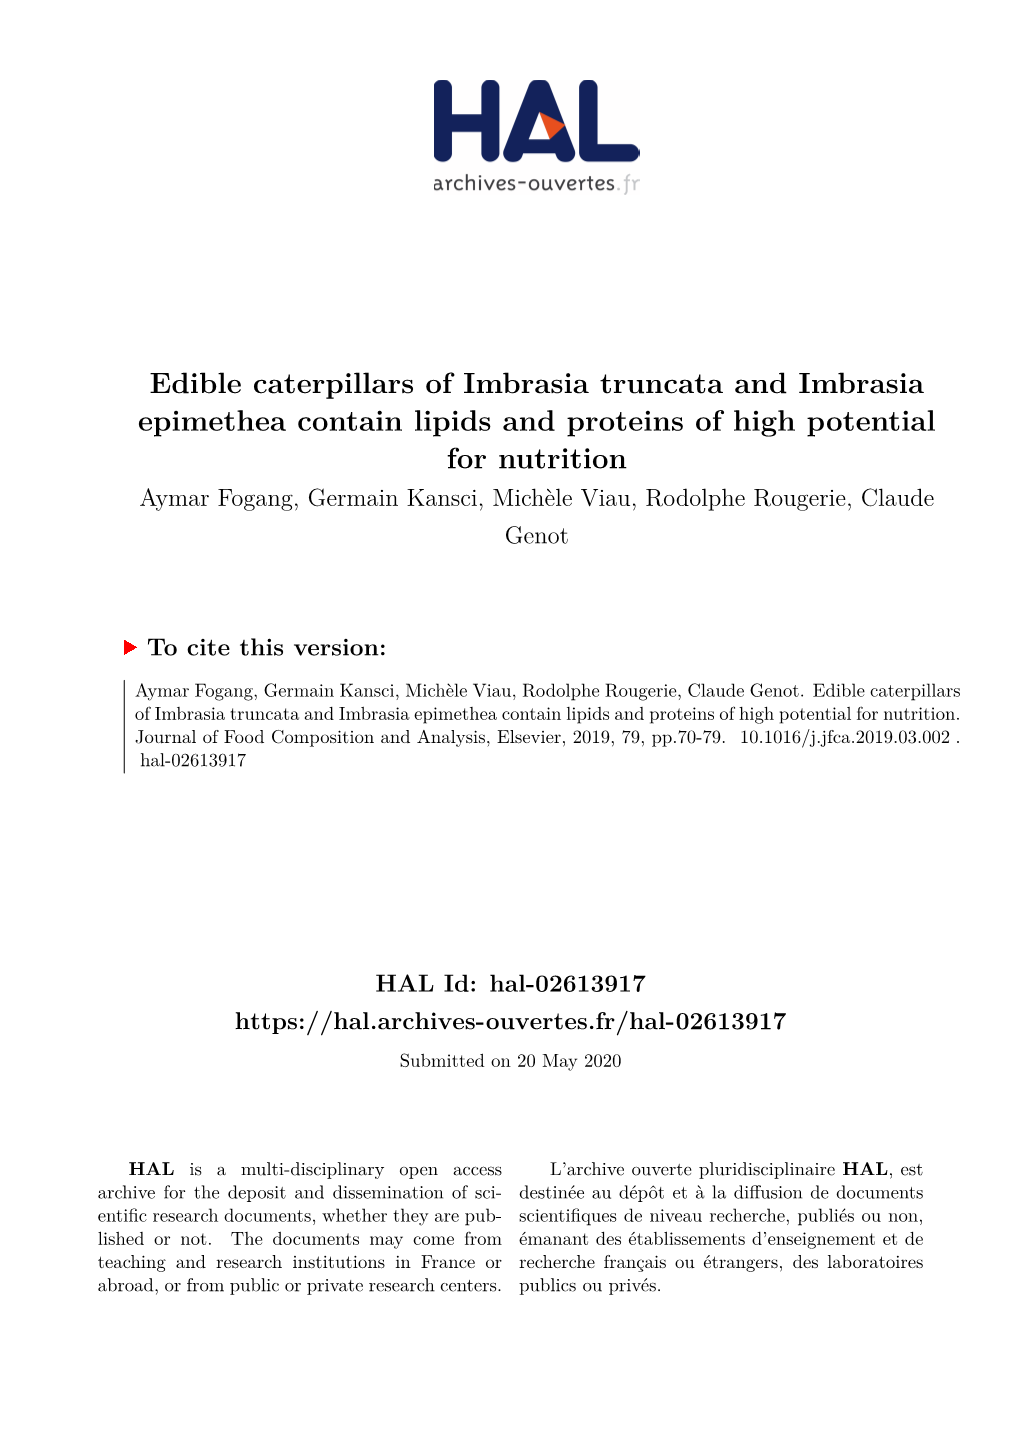 Edible Caterpillars of Imbrasia Truncata and Imbrasia Epimethea Contain Lipids and Proteins of High Potential for Nutrition